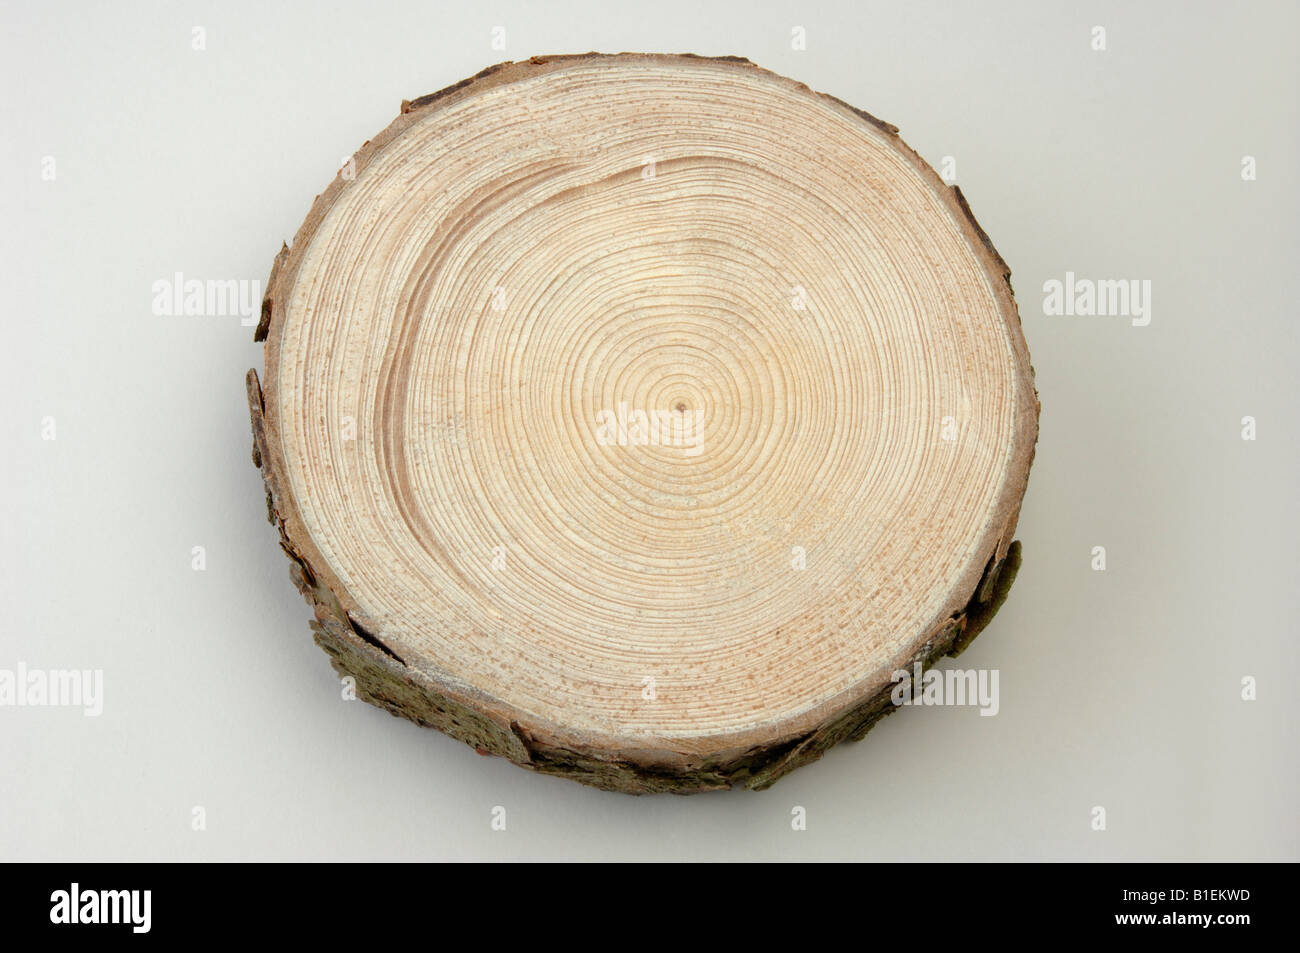 Common Spruce, Norway Spruce (Picea abies), trunk in cross section, studio picture Stock Photo